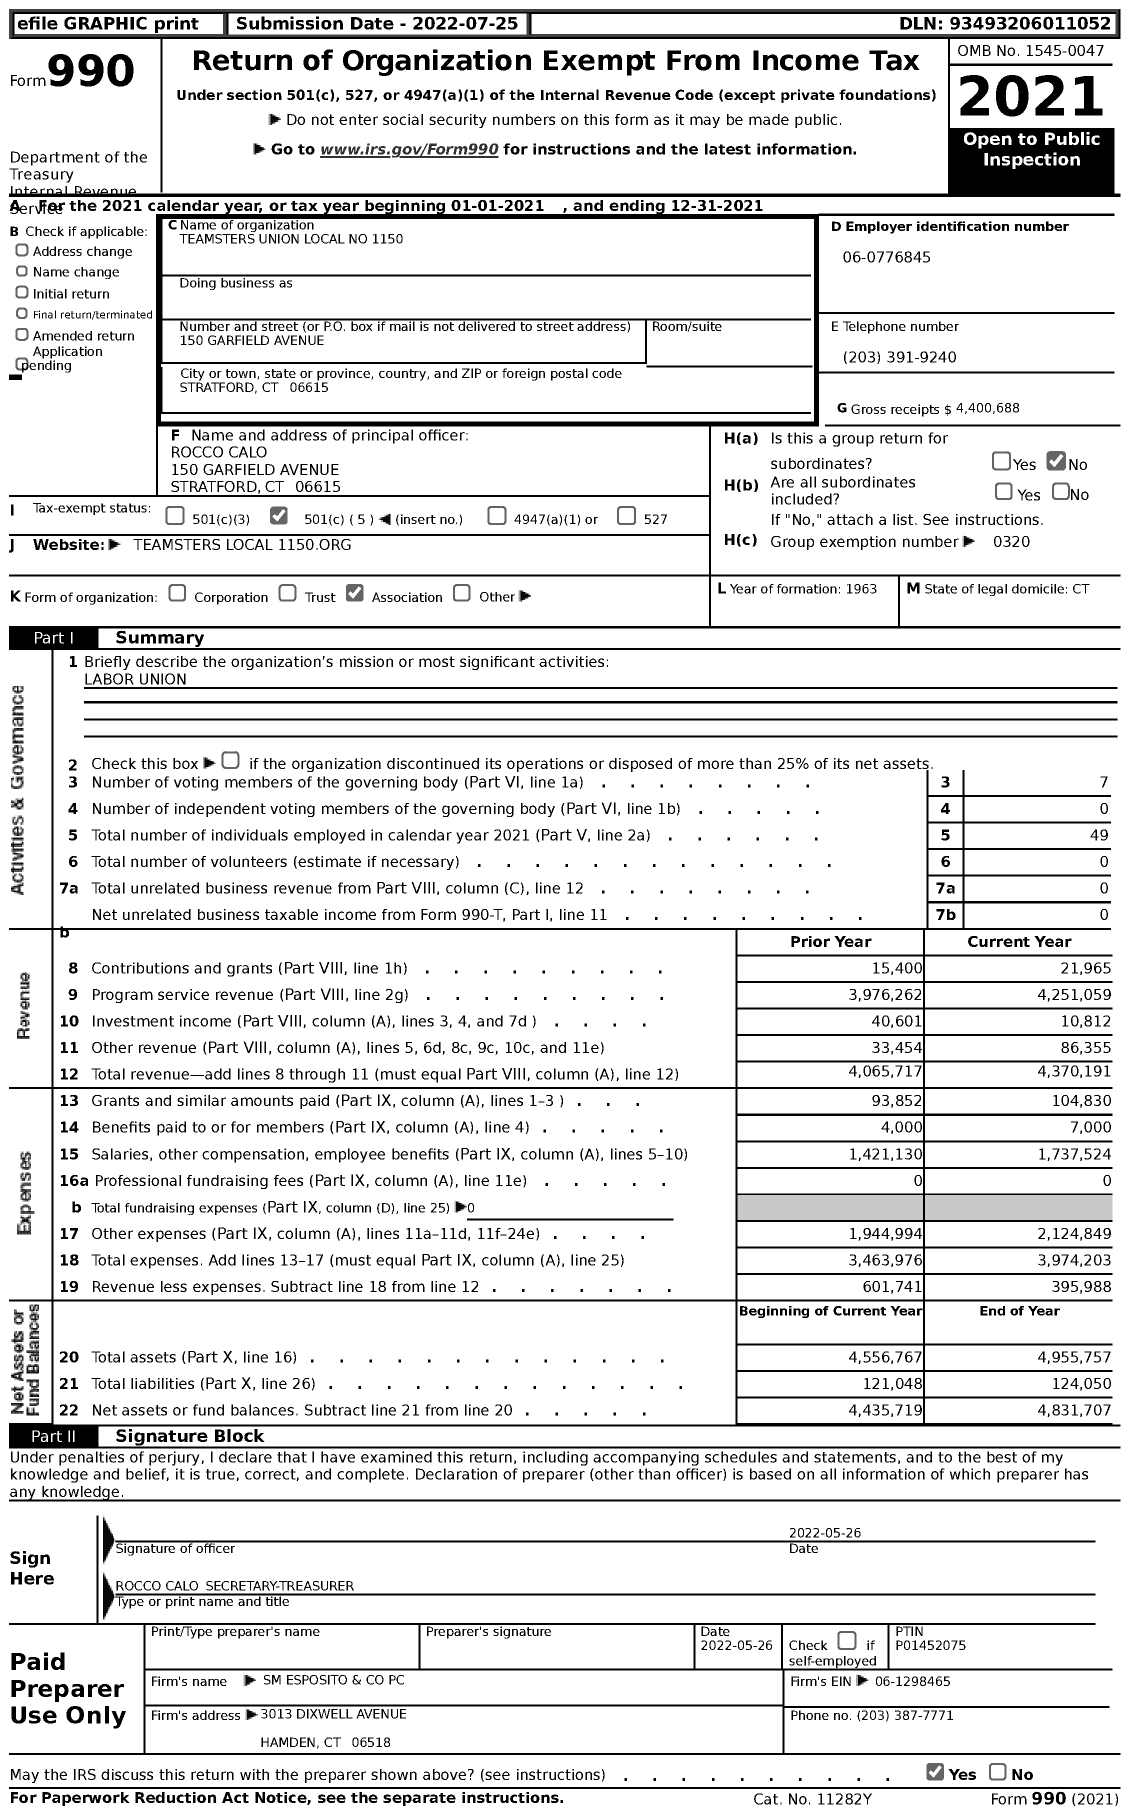 Image of first page of 2021 Form 990 for Teamsters Local 1150